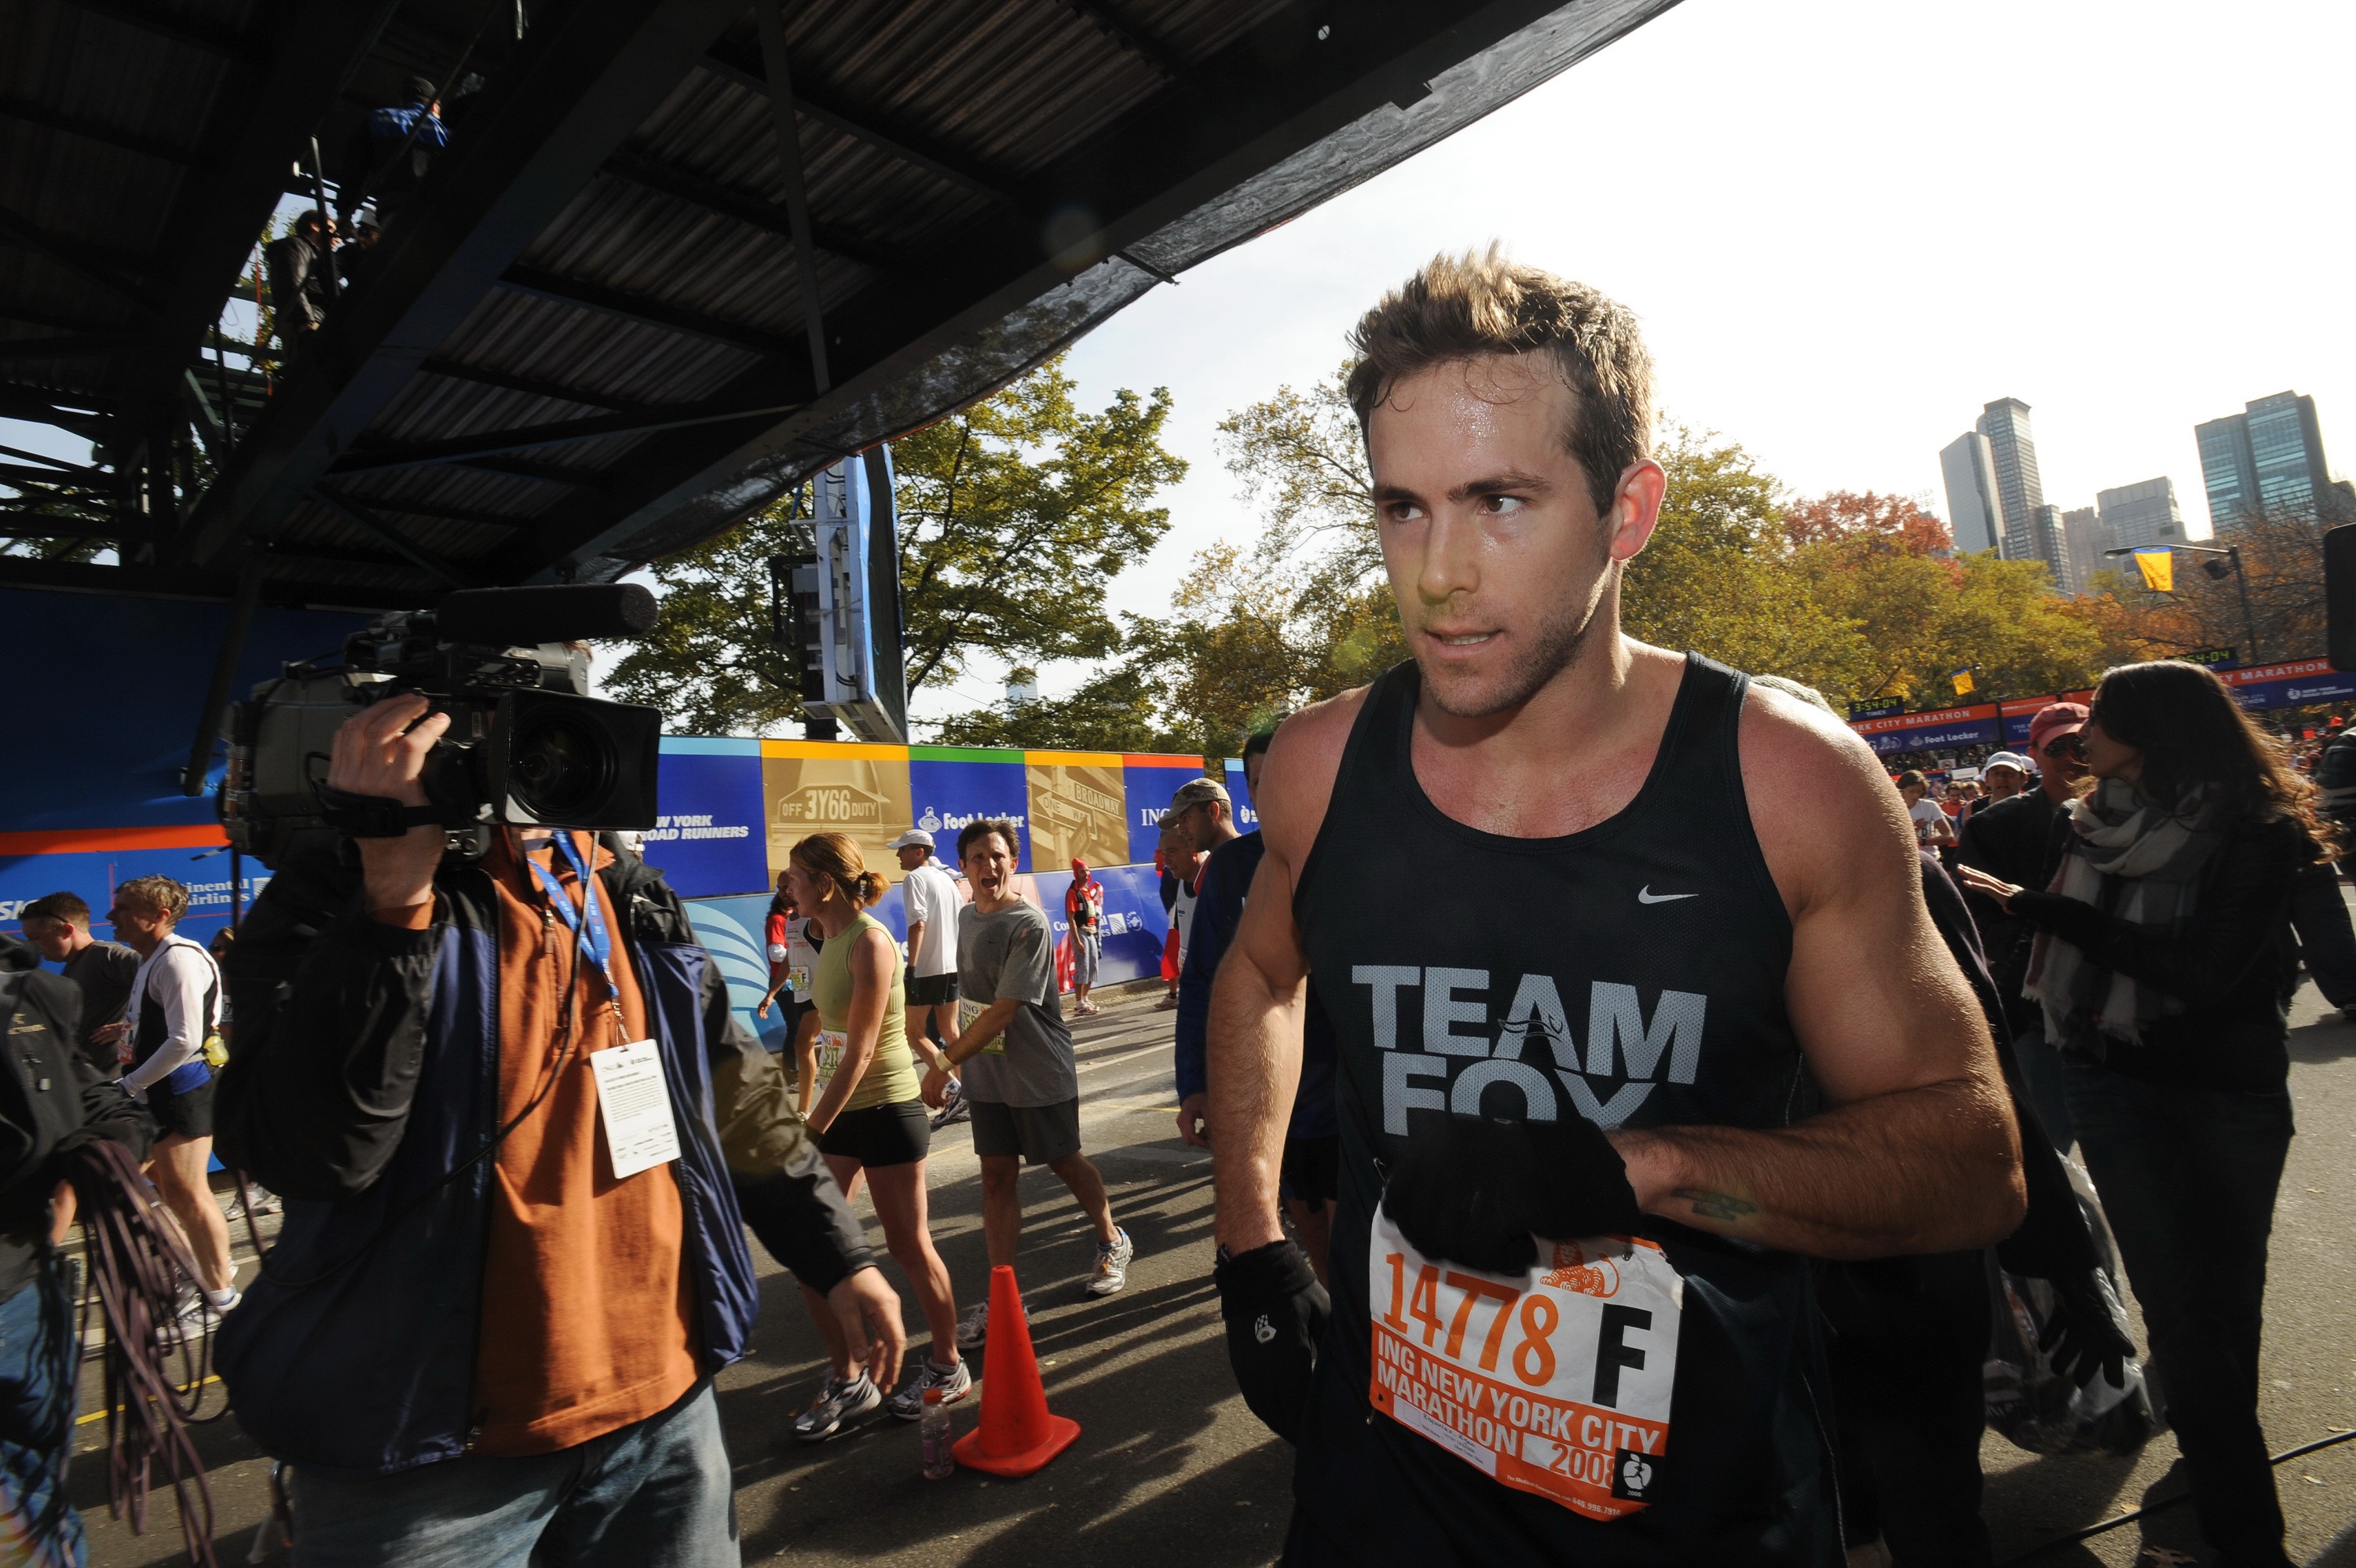 Actor Ryan Reynolds crosses the finish line at the 2008 New York City Marathon, which he completed in three hours and 50 minutes. Photo: NY Daily News Archive